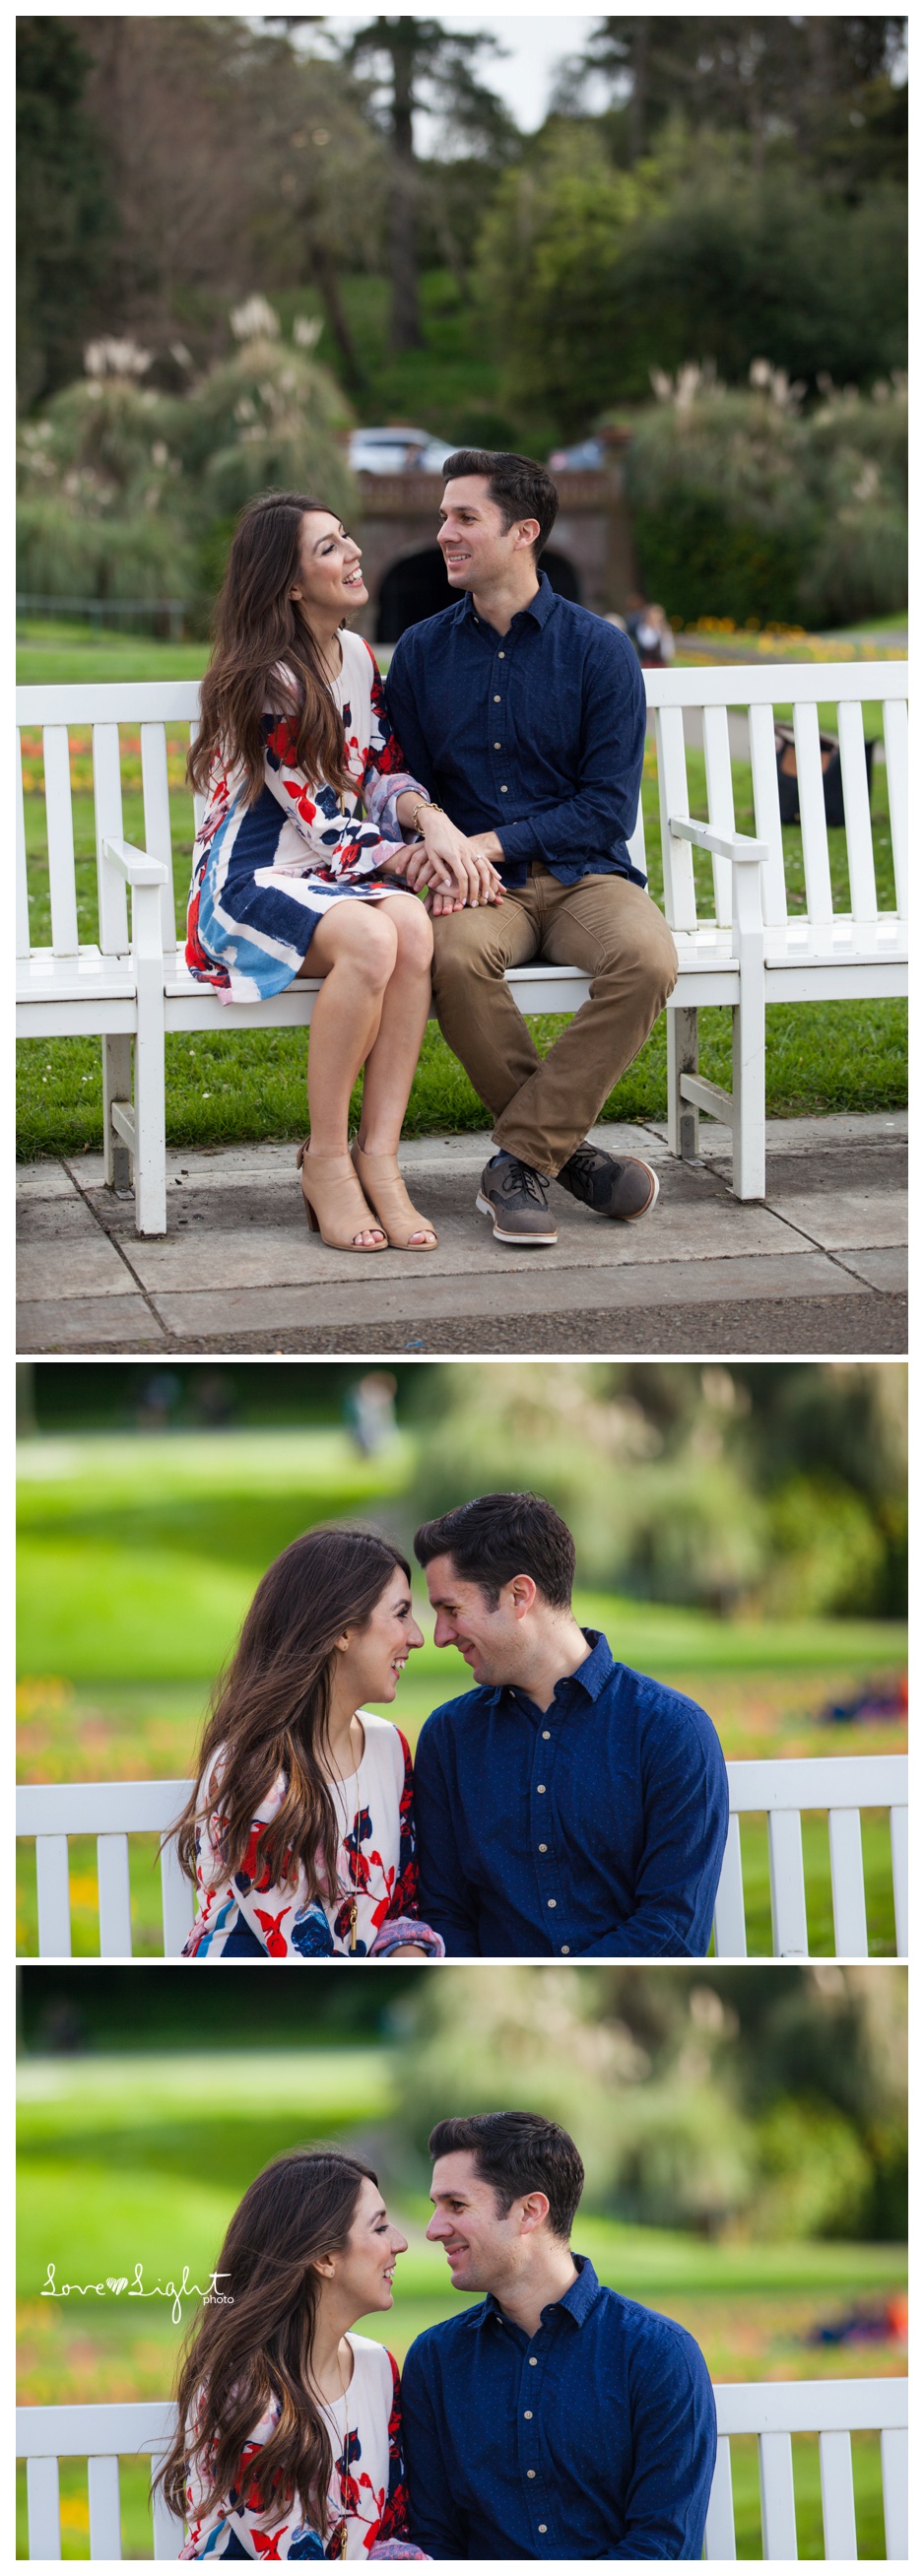 Conservatory of Flowers Engagment